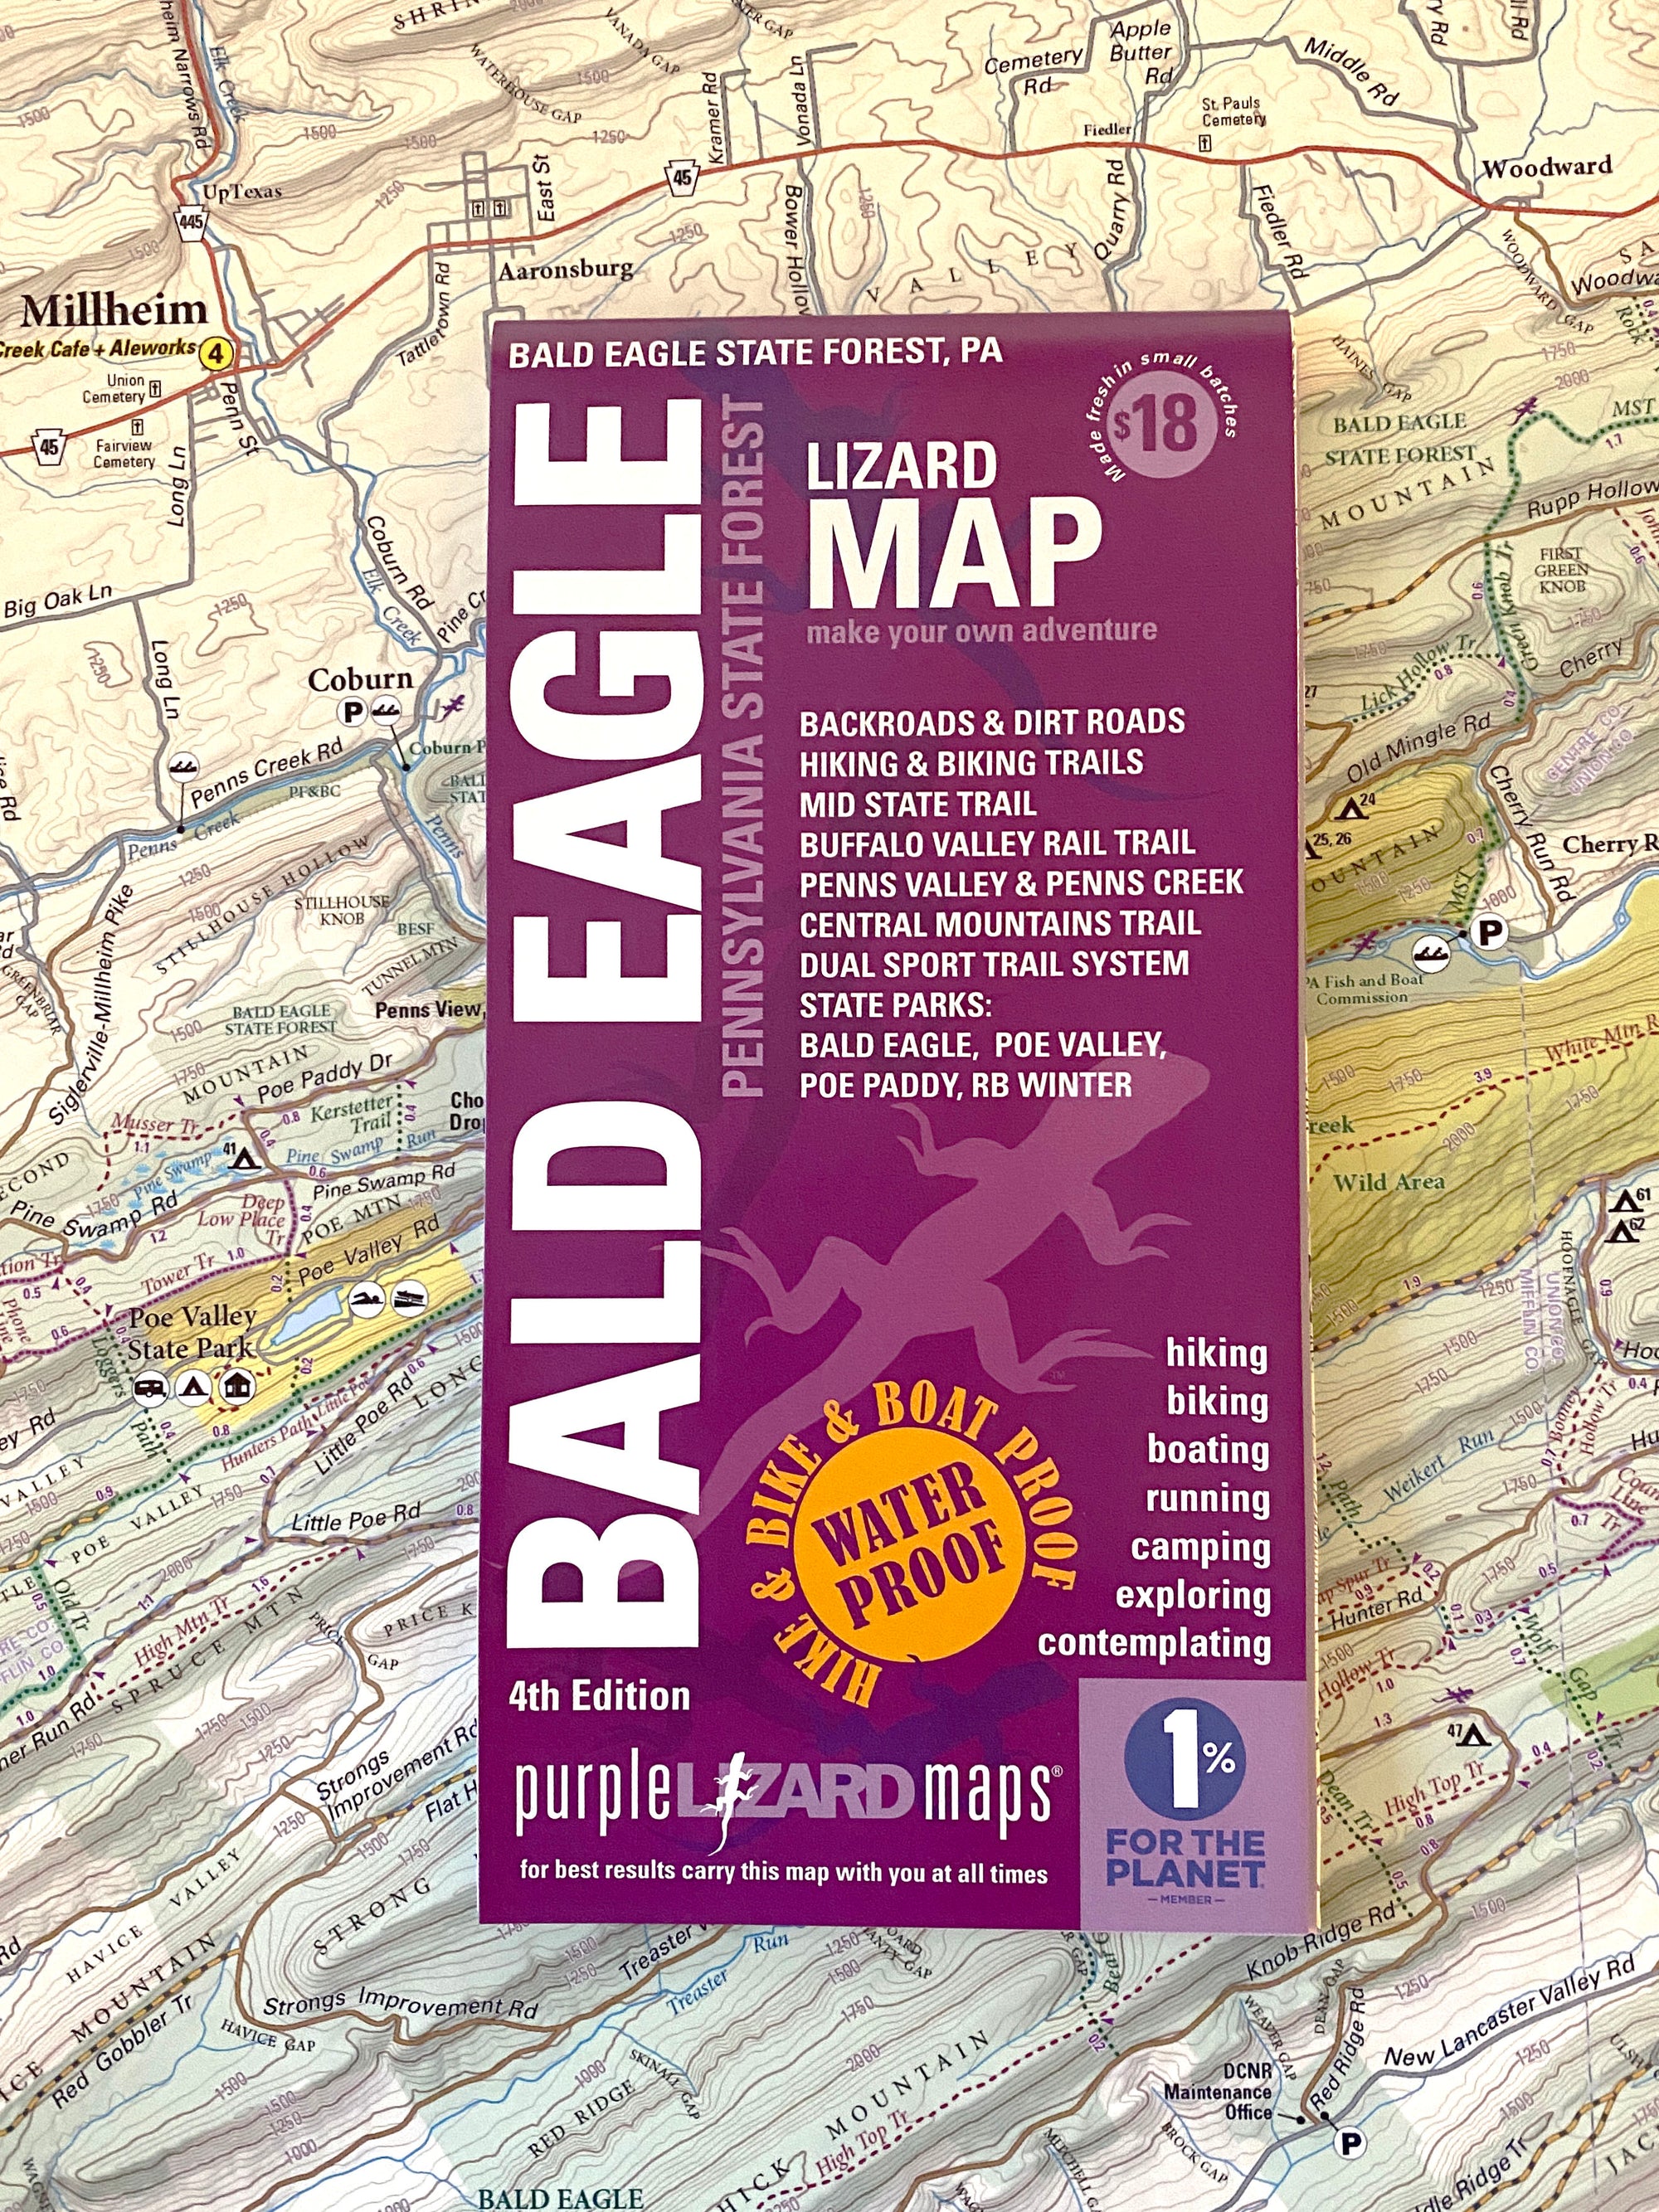 Bald Eagle State Forest Purple Lizard Map - Adventure Starts Here